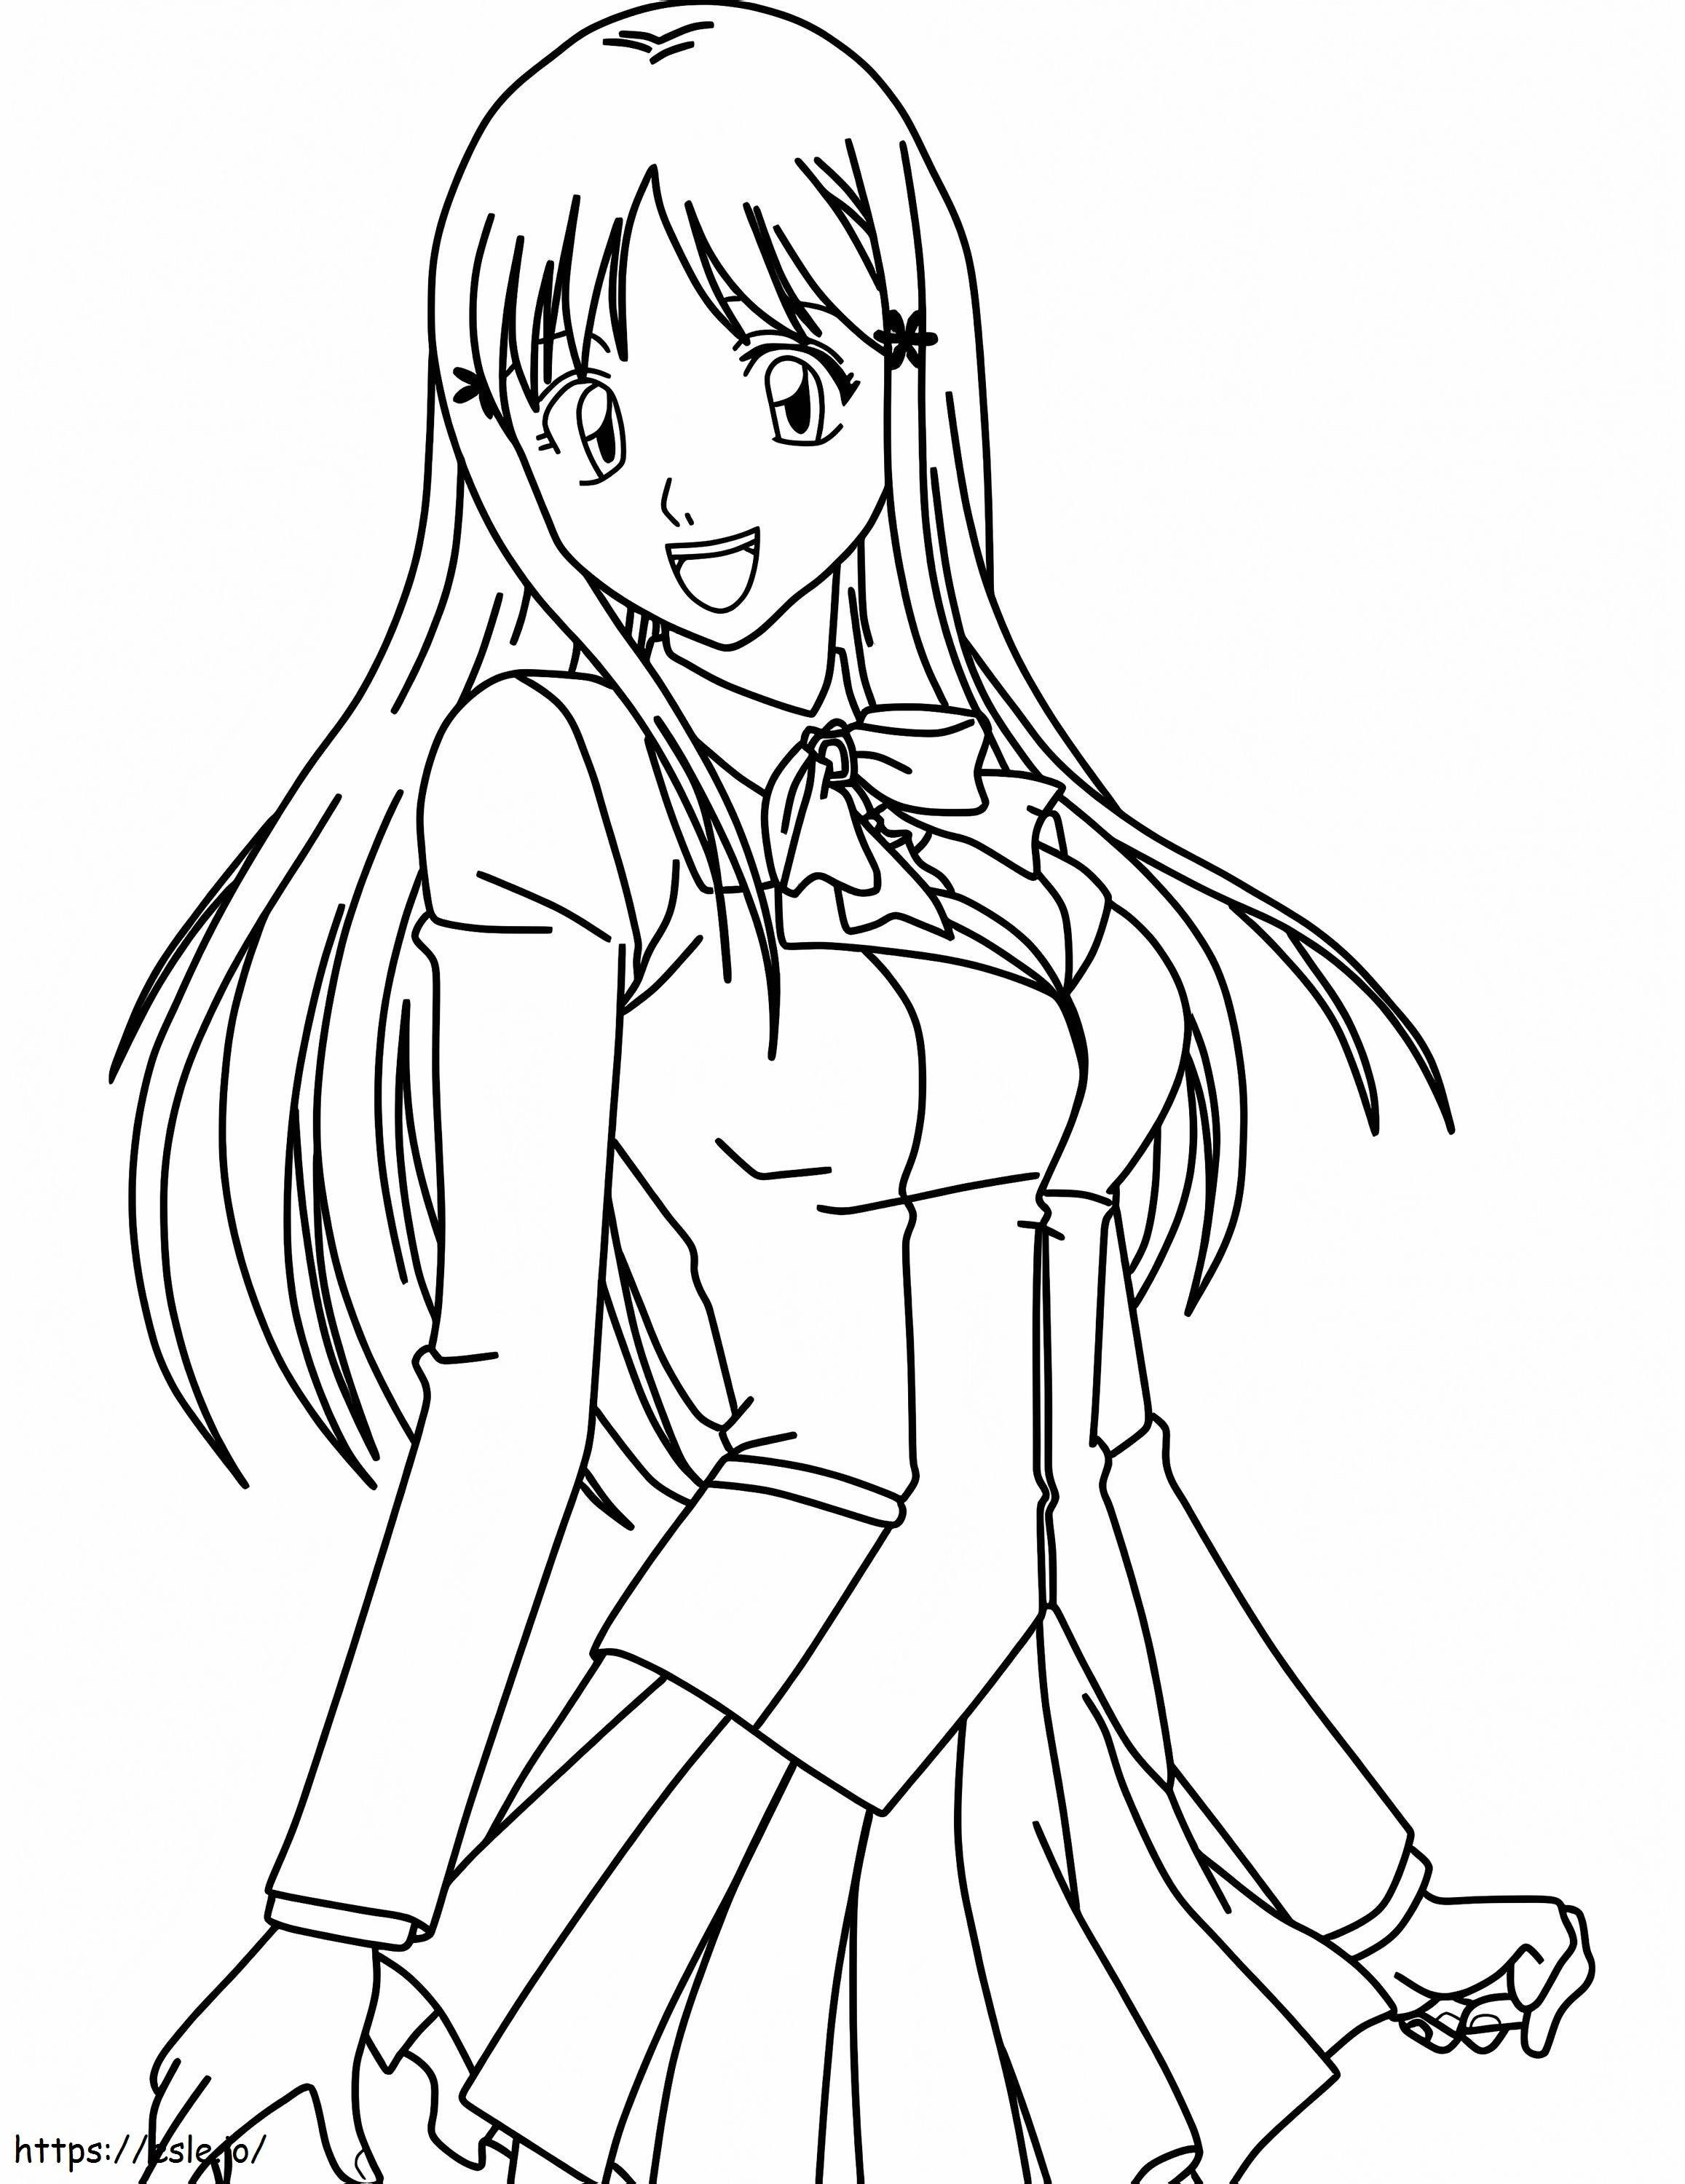 Cute Orihime Inoue coloring page